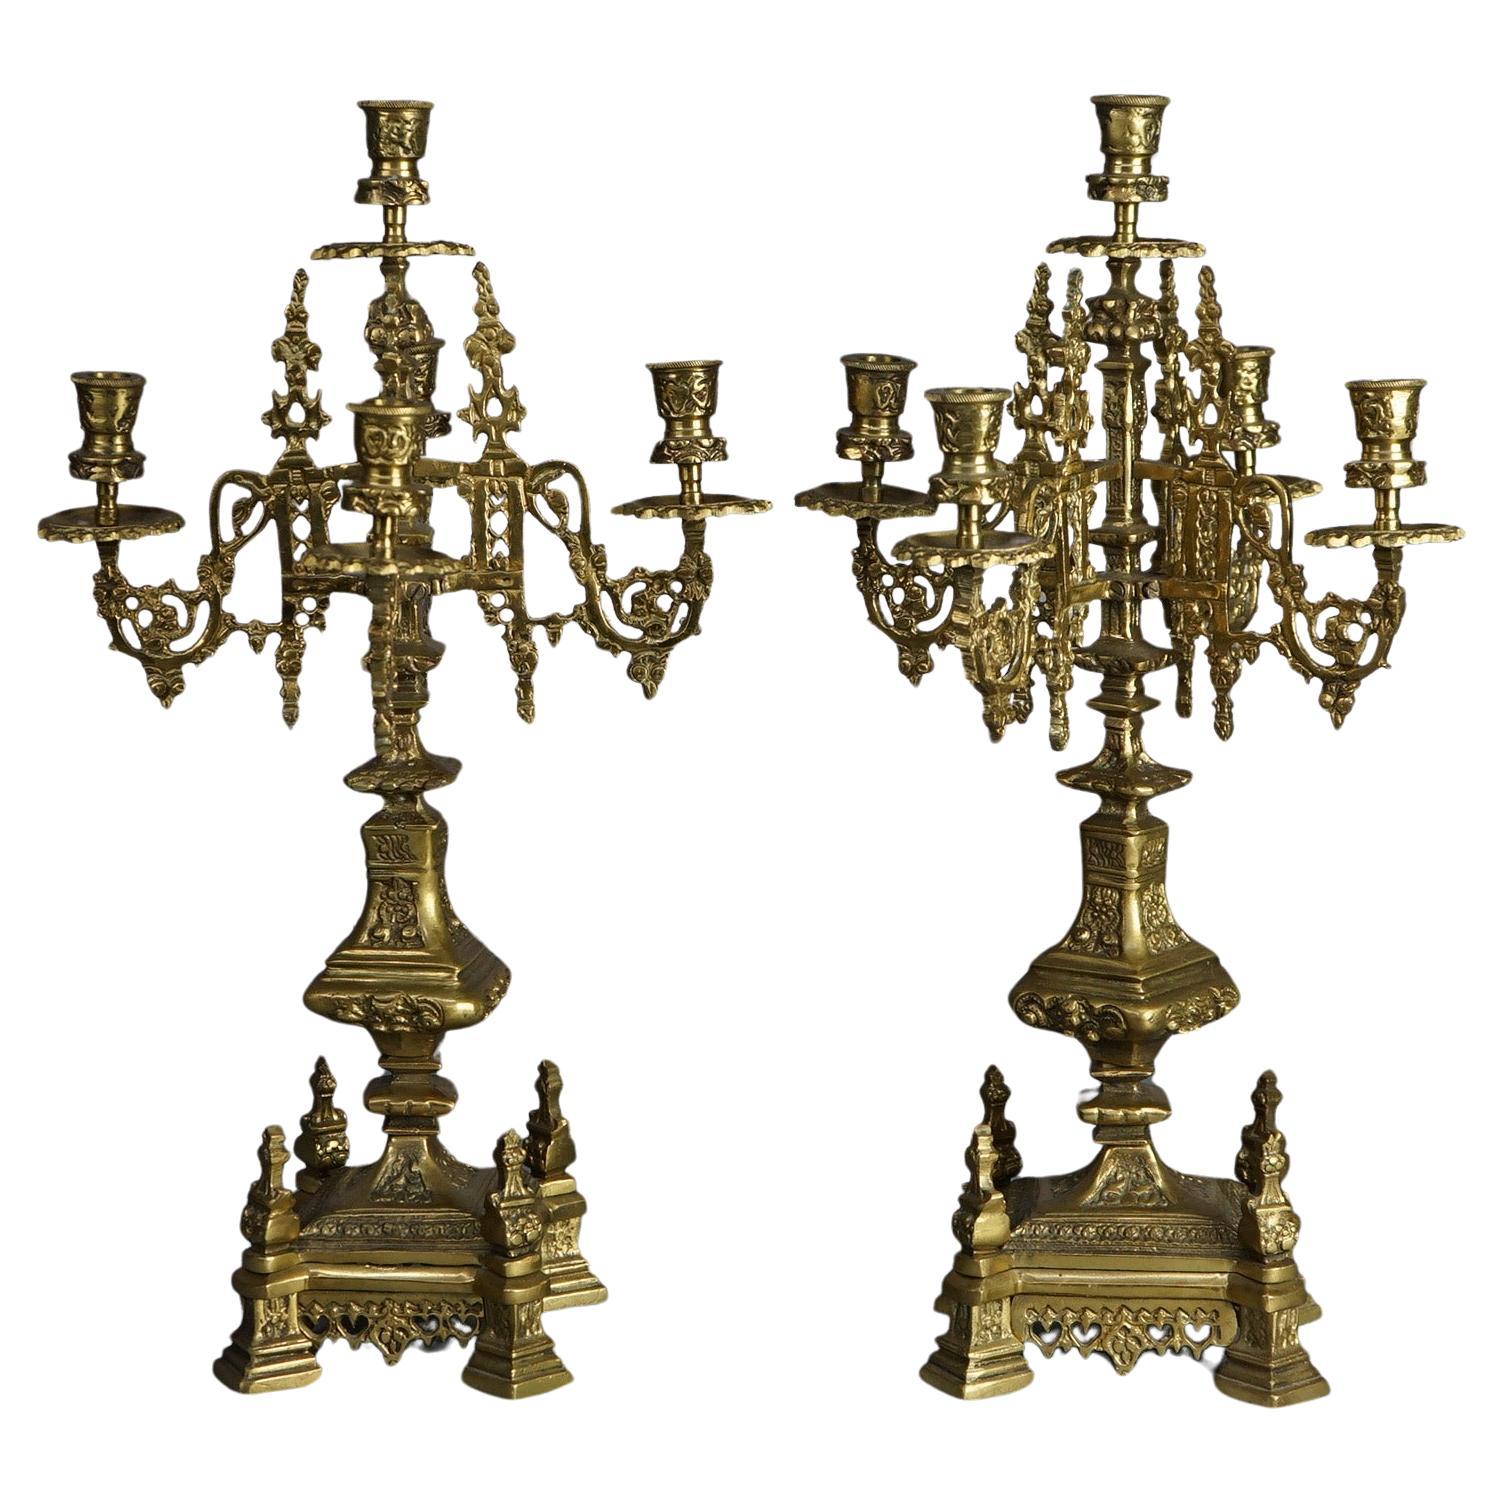 Antique Pair Gothic Revival Bronzed Five-Light & Footed Candelabra C1850